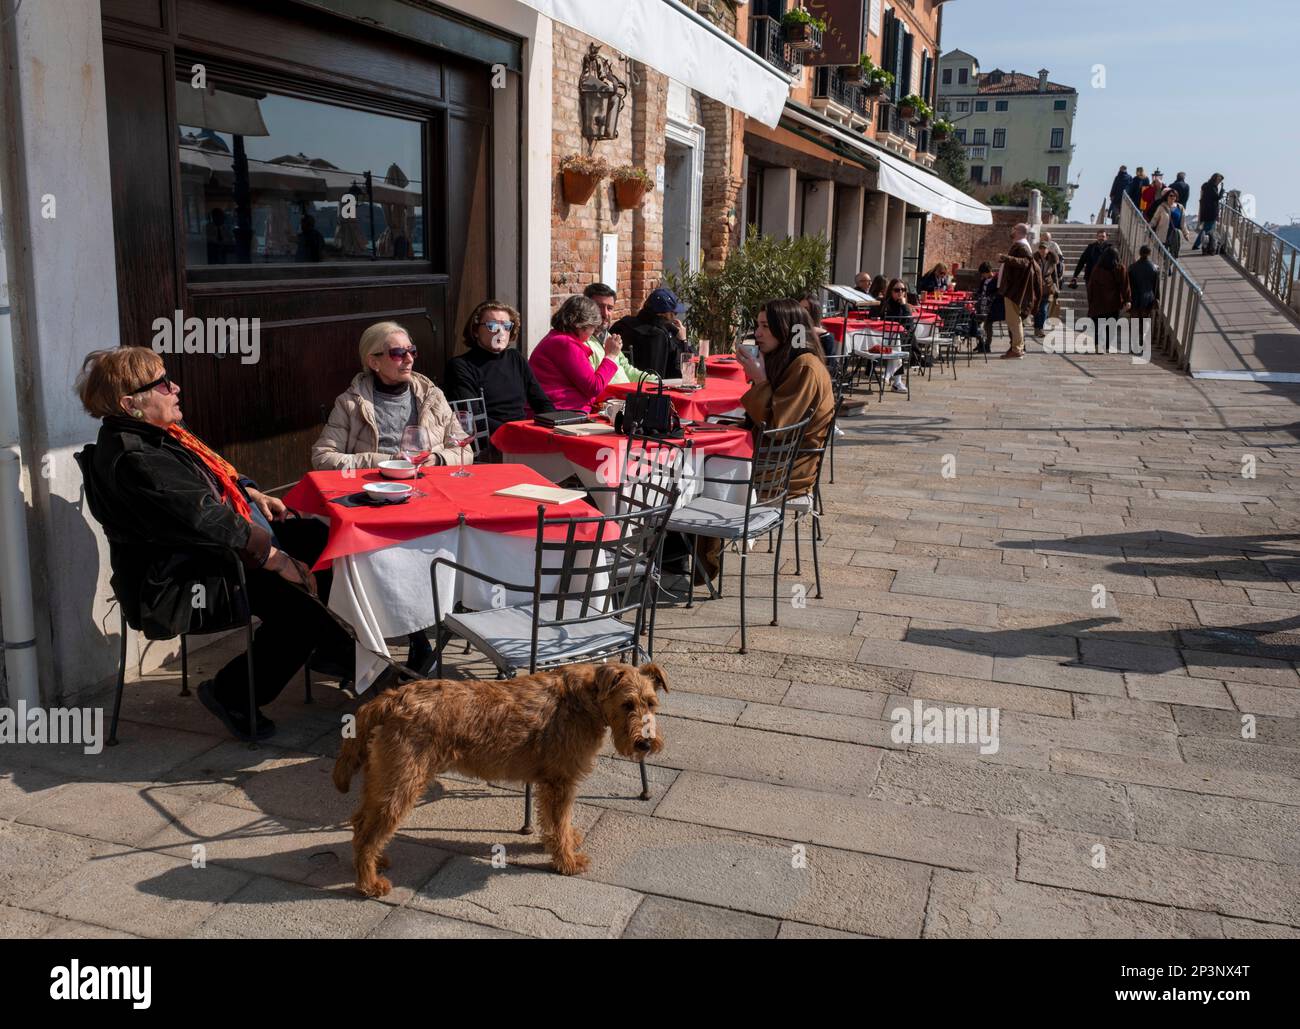 People and a dog enjoy the warmth of the spring sunshine at a canal side cafe on the Fondamenta Zattere Al Gesuiti, Venice, Italy. Stock Photo